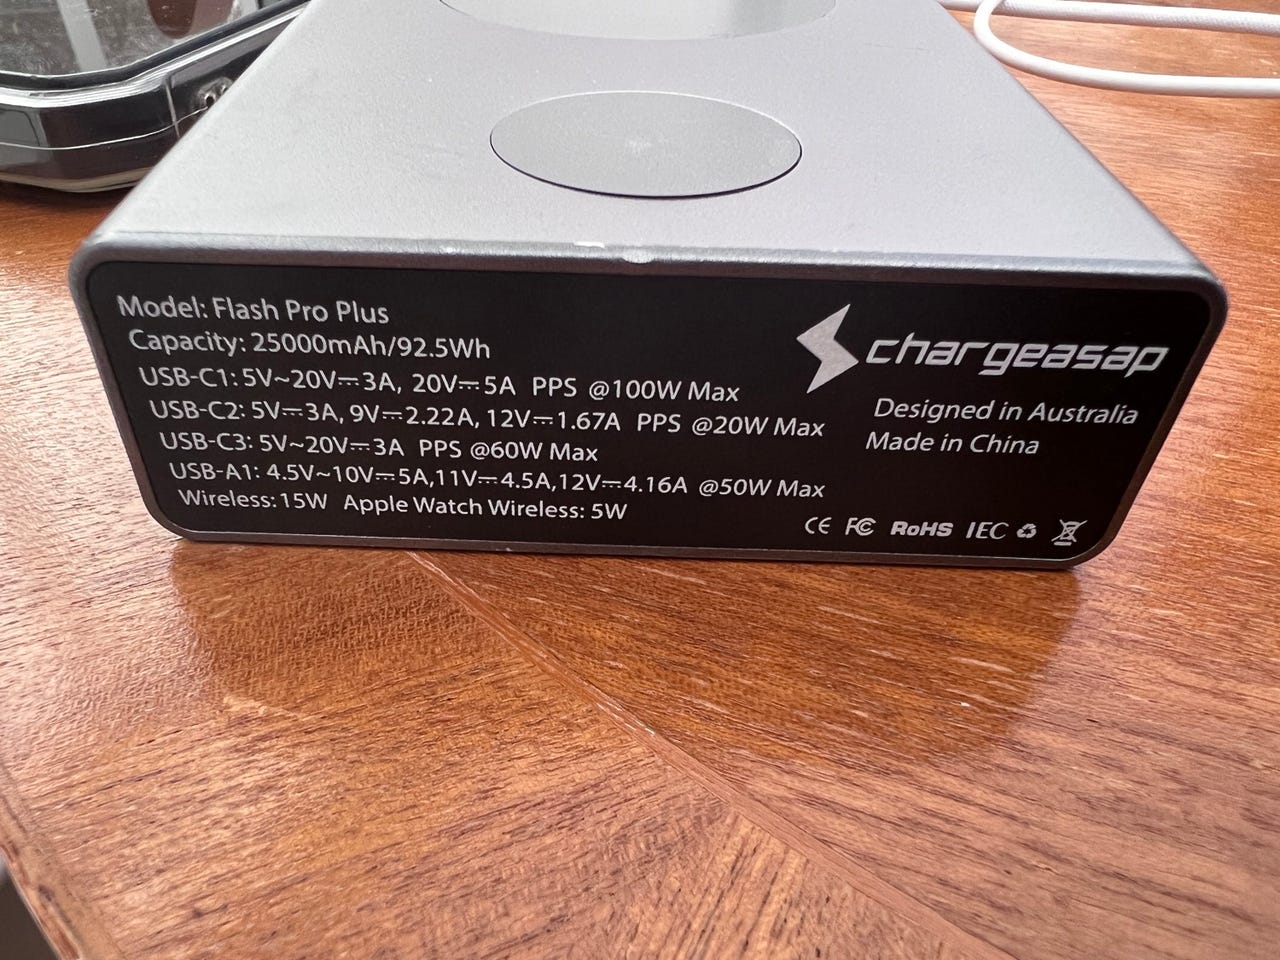 Chargeasap Flash Pro Plus in action